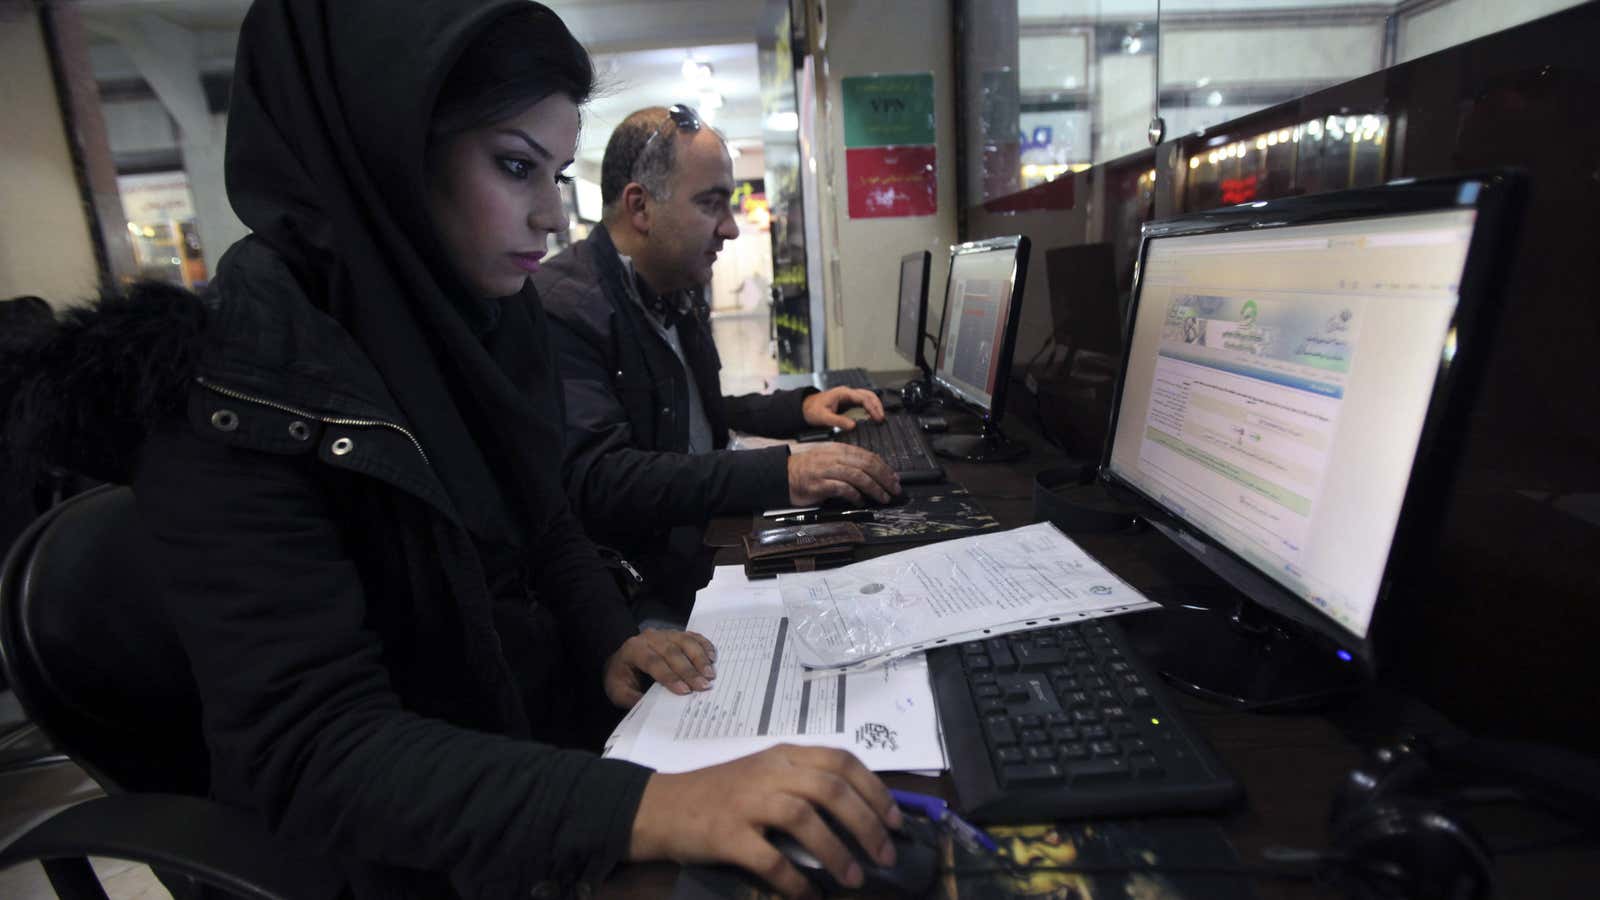 Iran’s leaders want to stamp out Western influence via the internet.